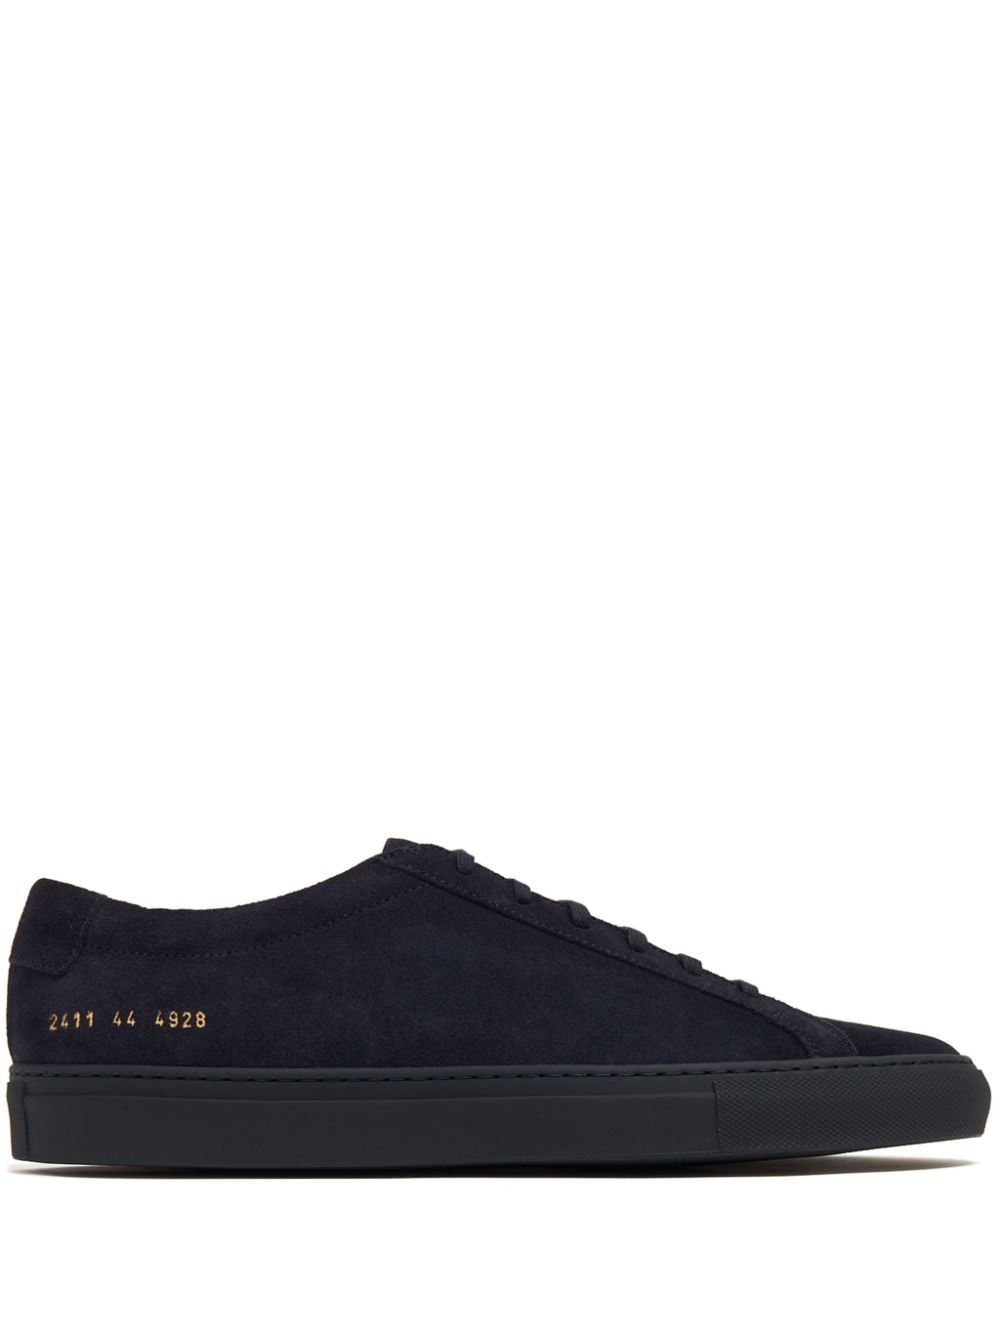 Common Projects Achilles Sneakers - Blau von Common Projects